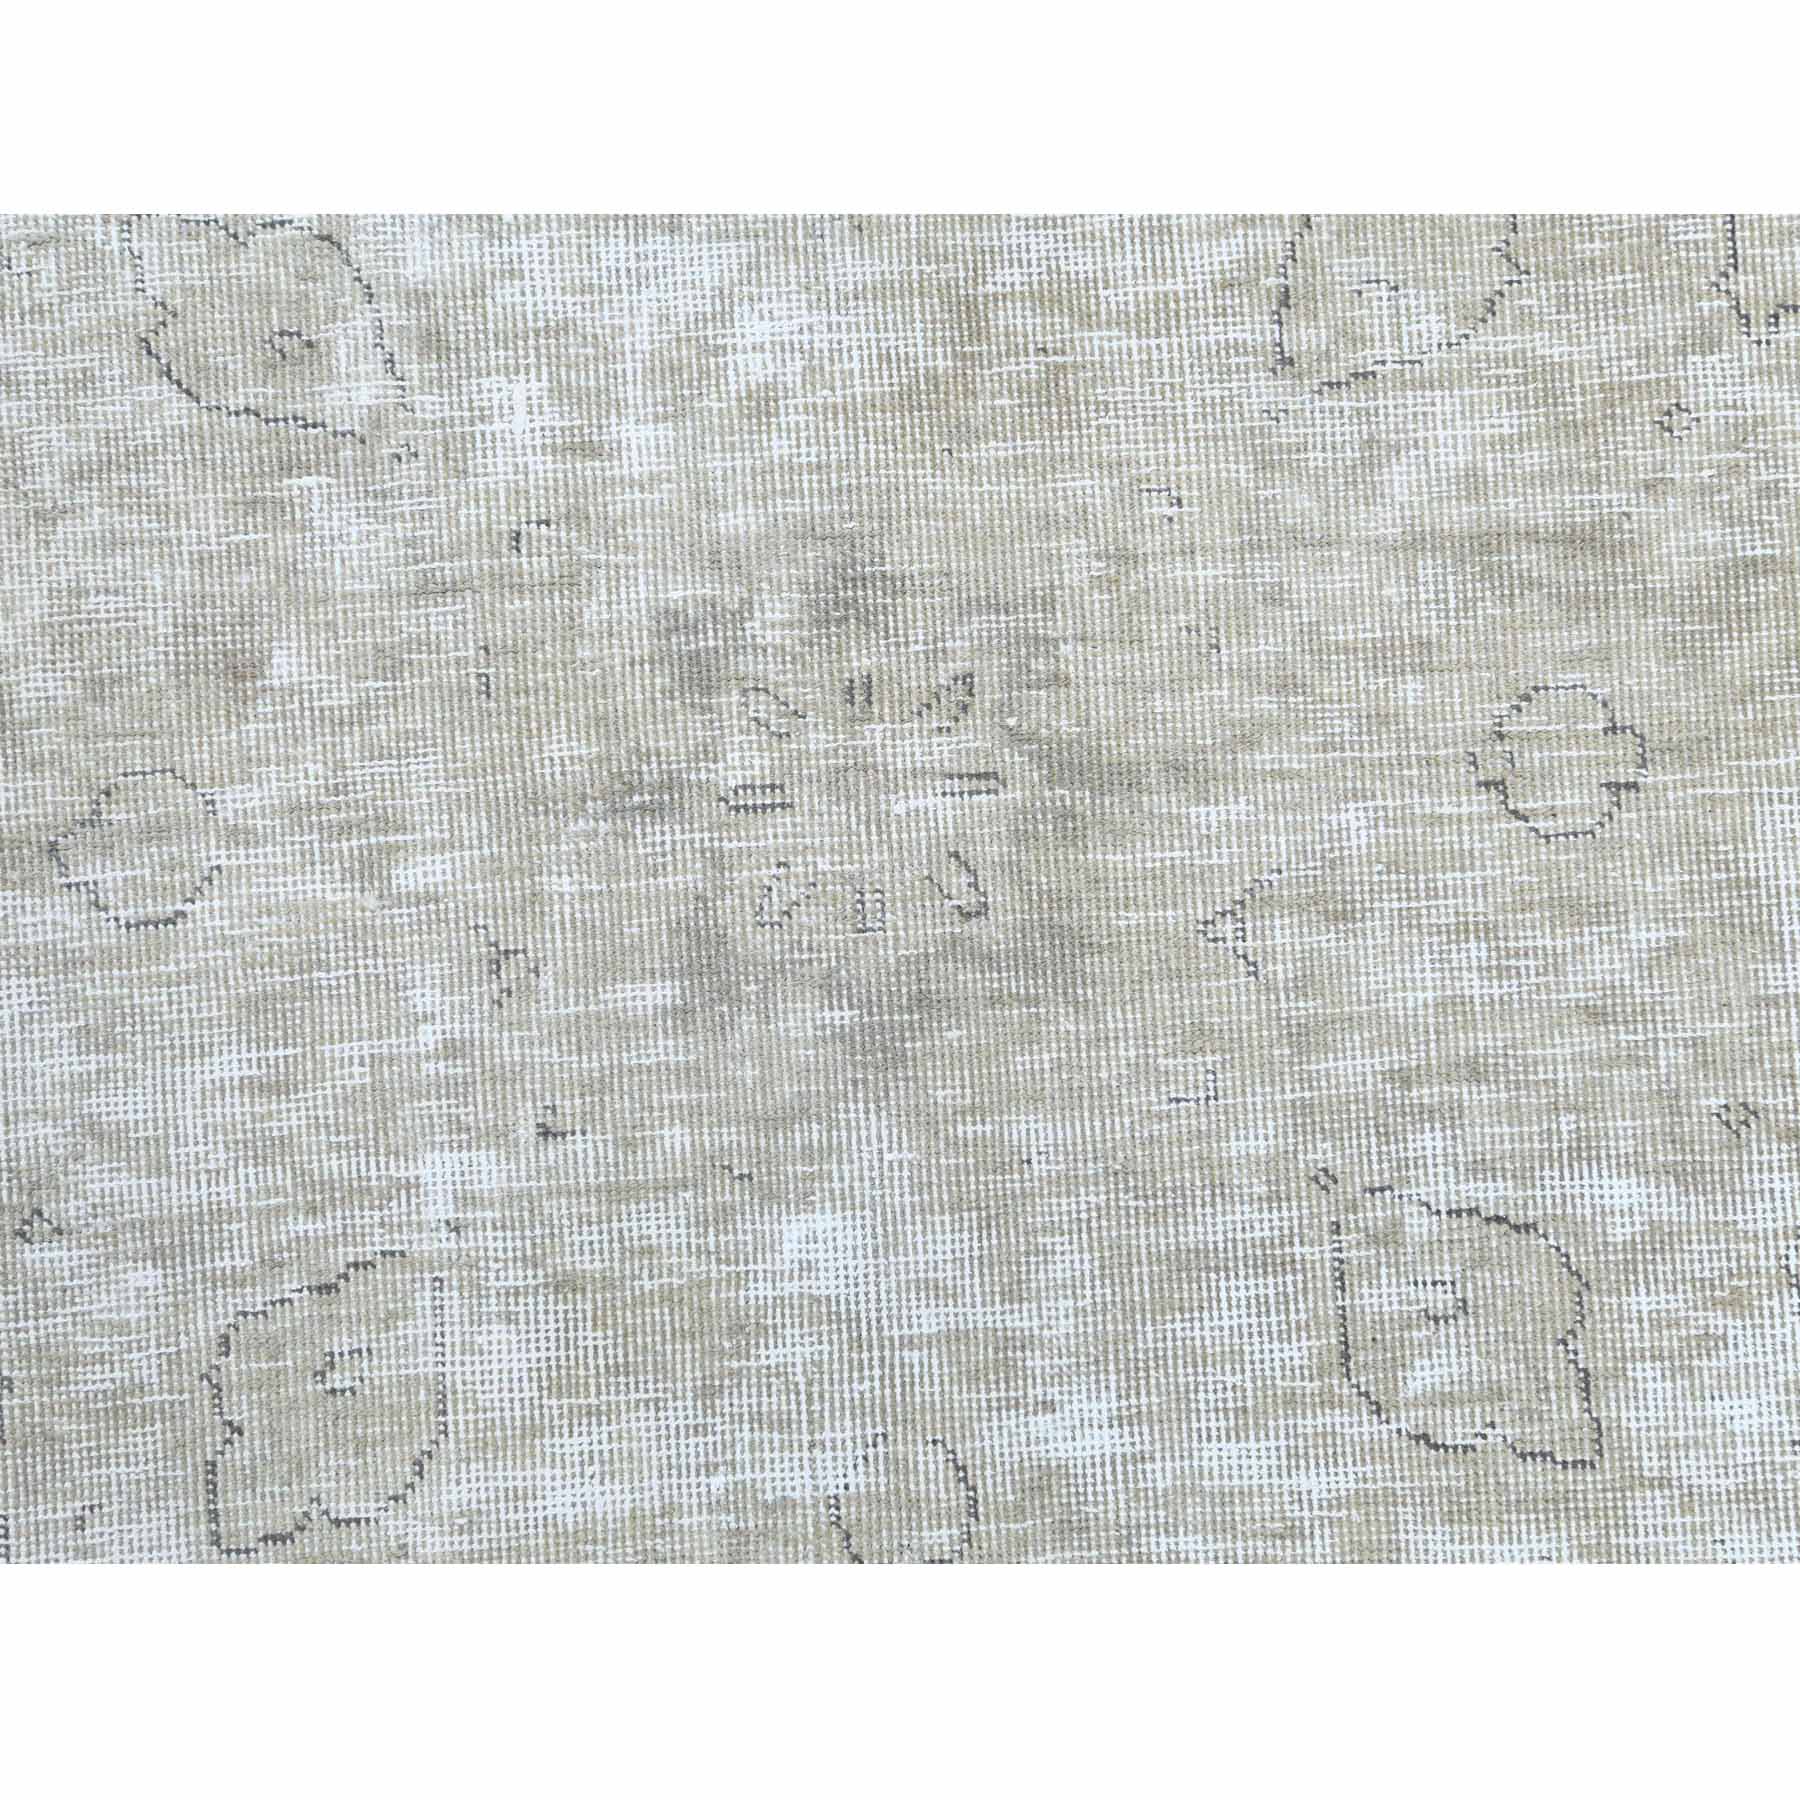 Overdyed-Vintage-Hand-Knotted-Rug-308145